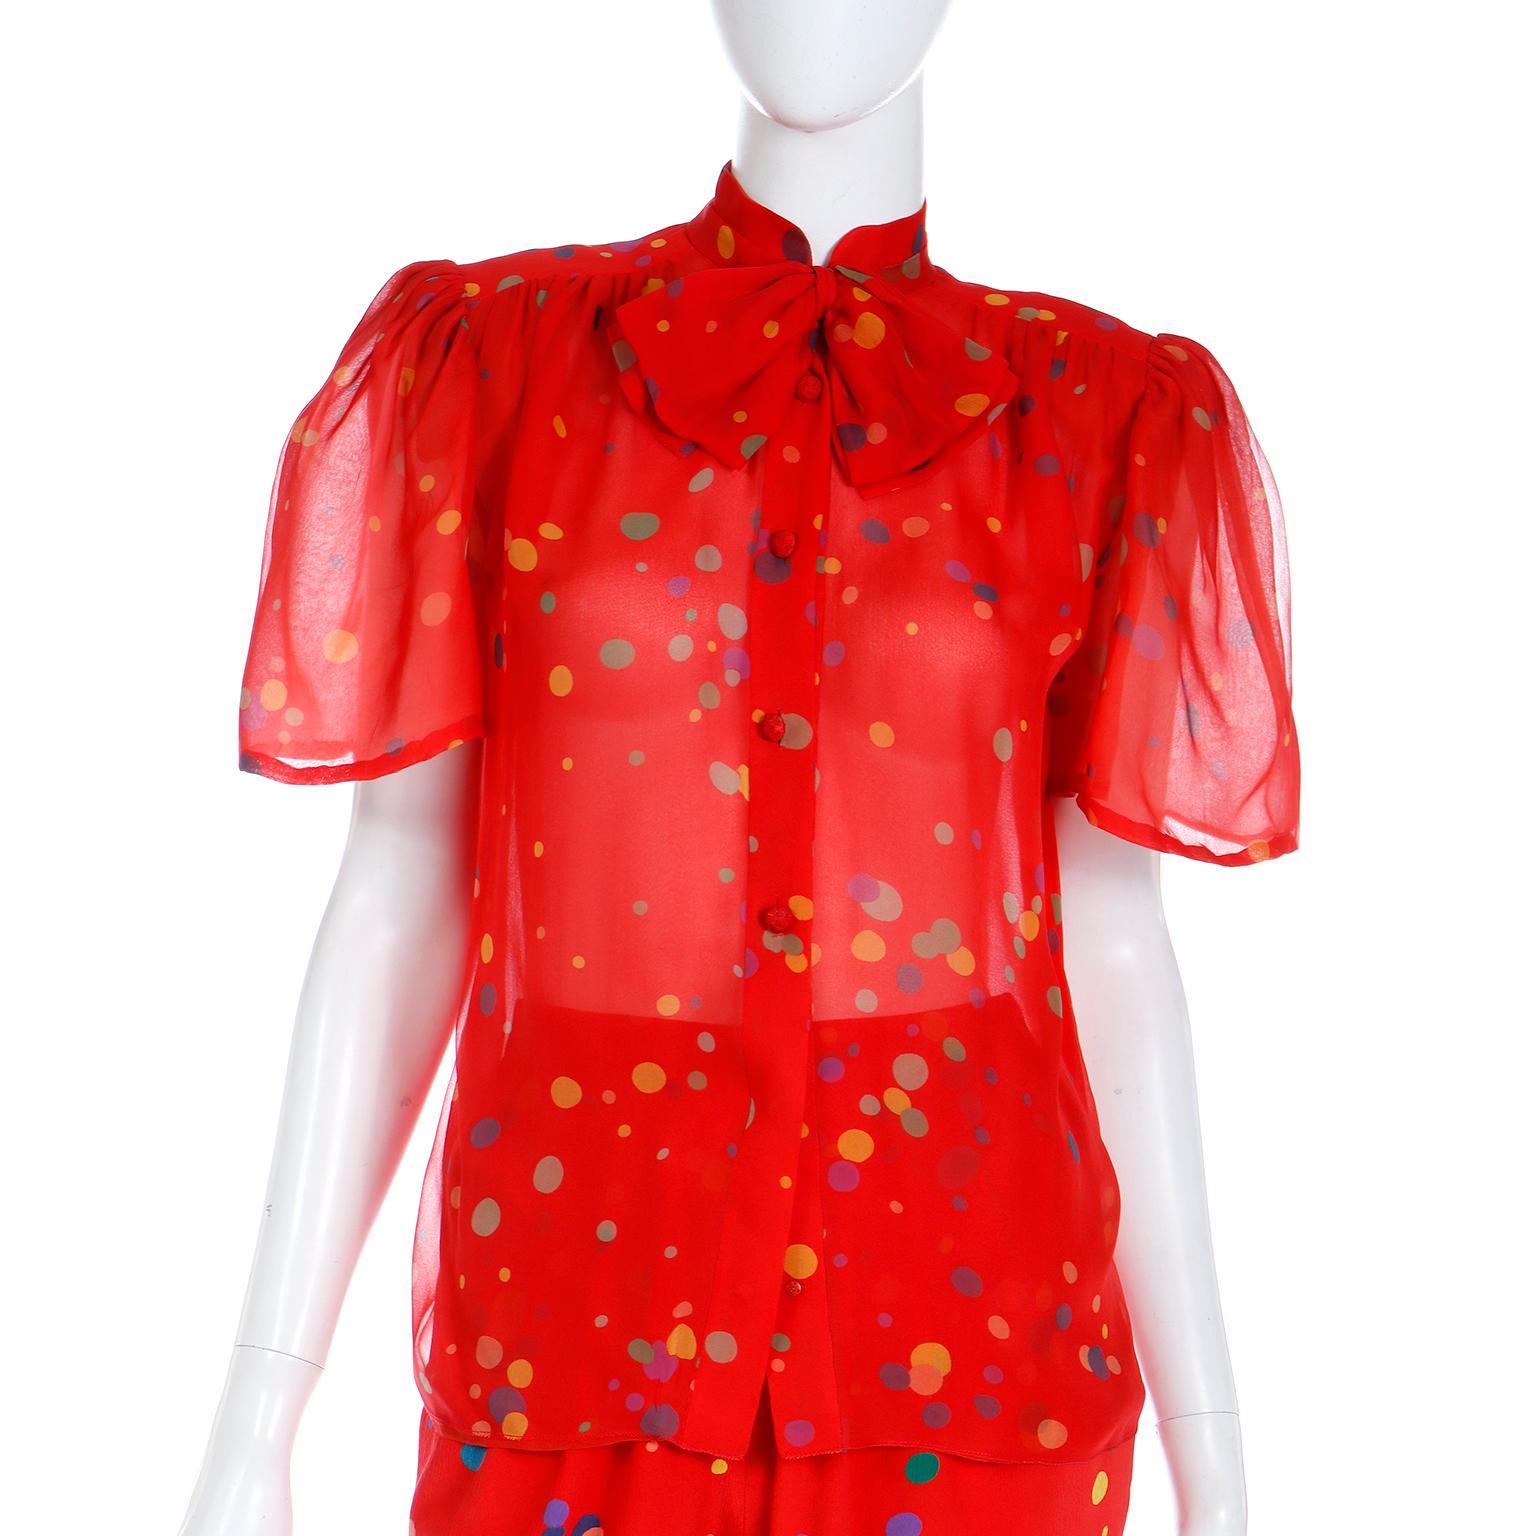 1979 Valentino Couture Red Silk Polka Dot 3pc Outfit W Bow Blouse Pants & Jacket 10